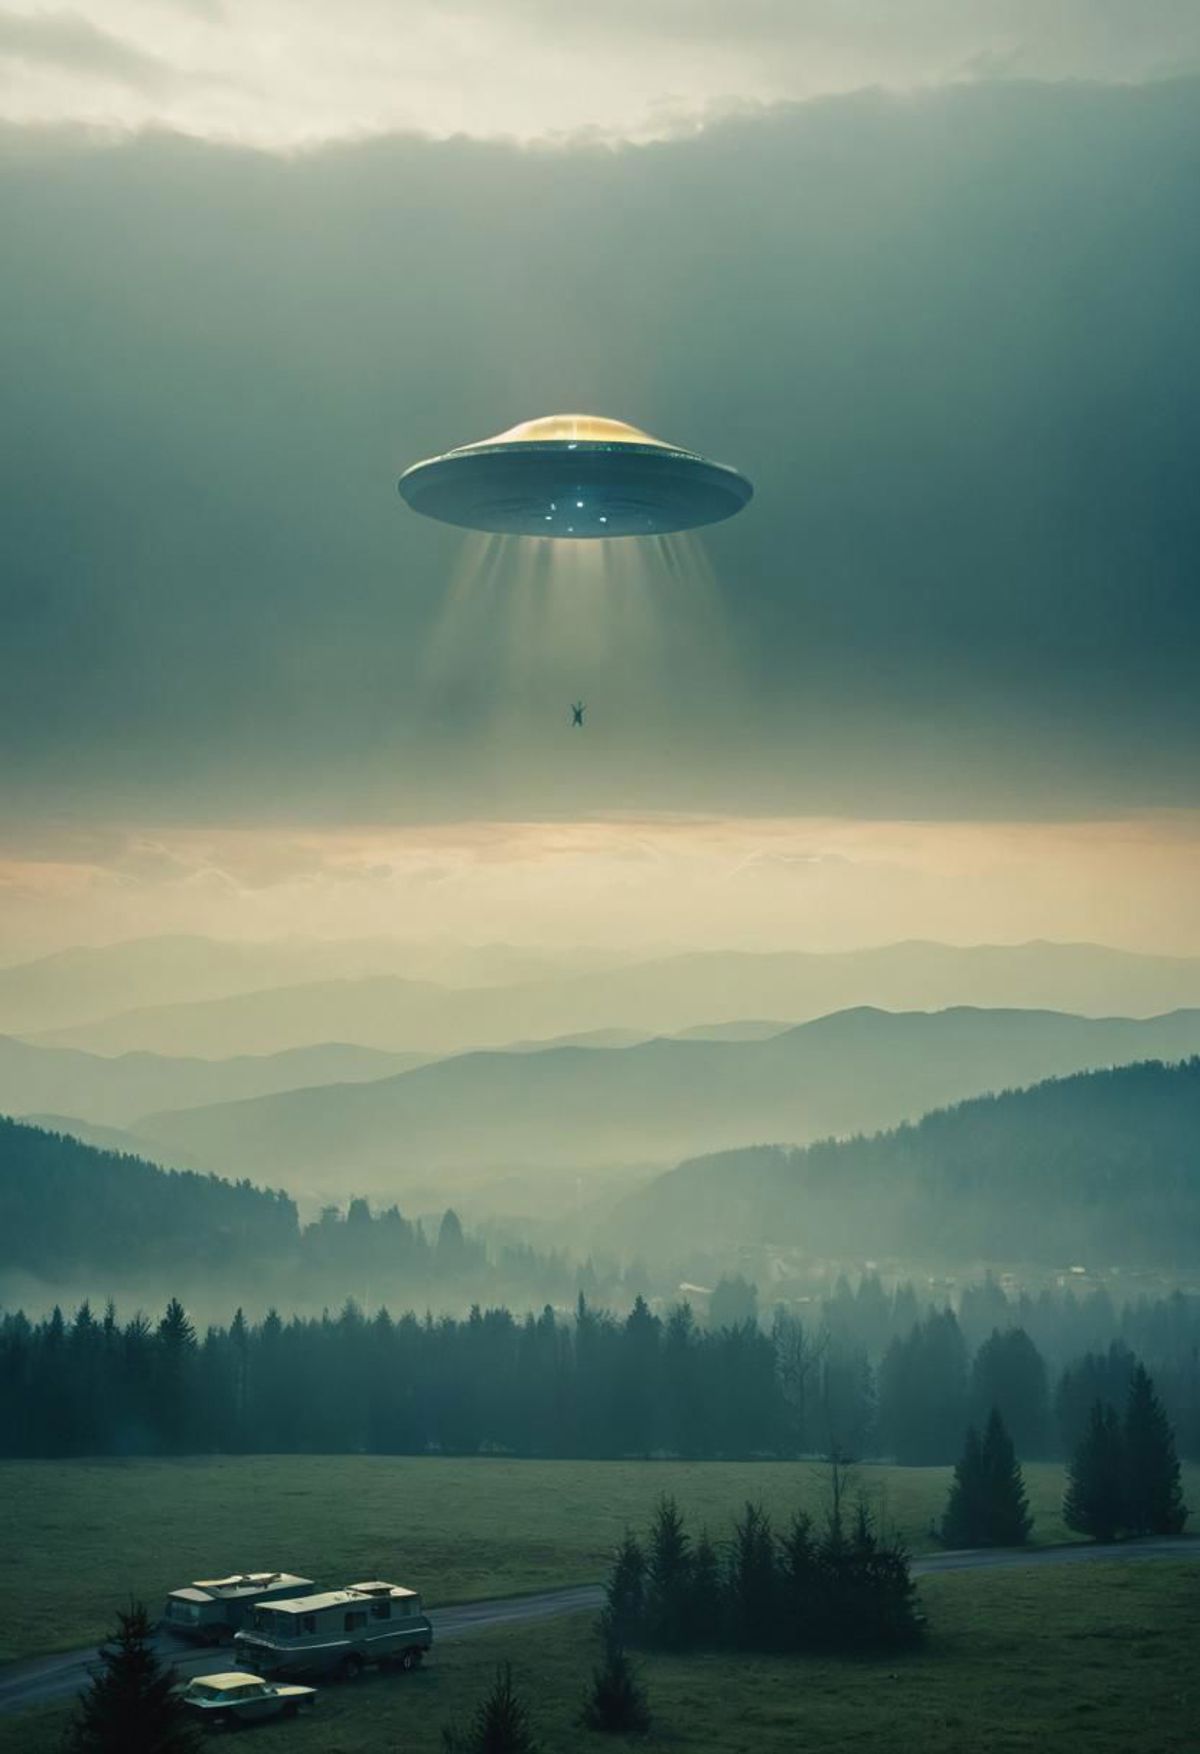 A UFO is hovering over a forest, with a figure below it.